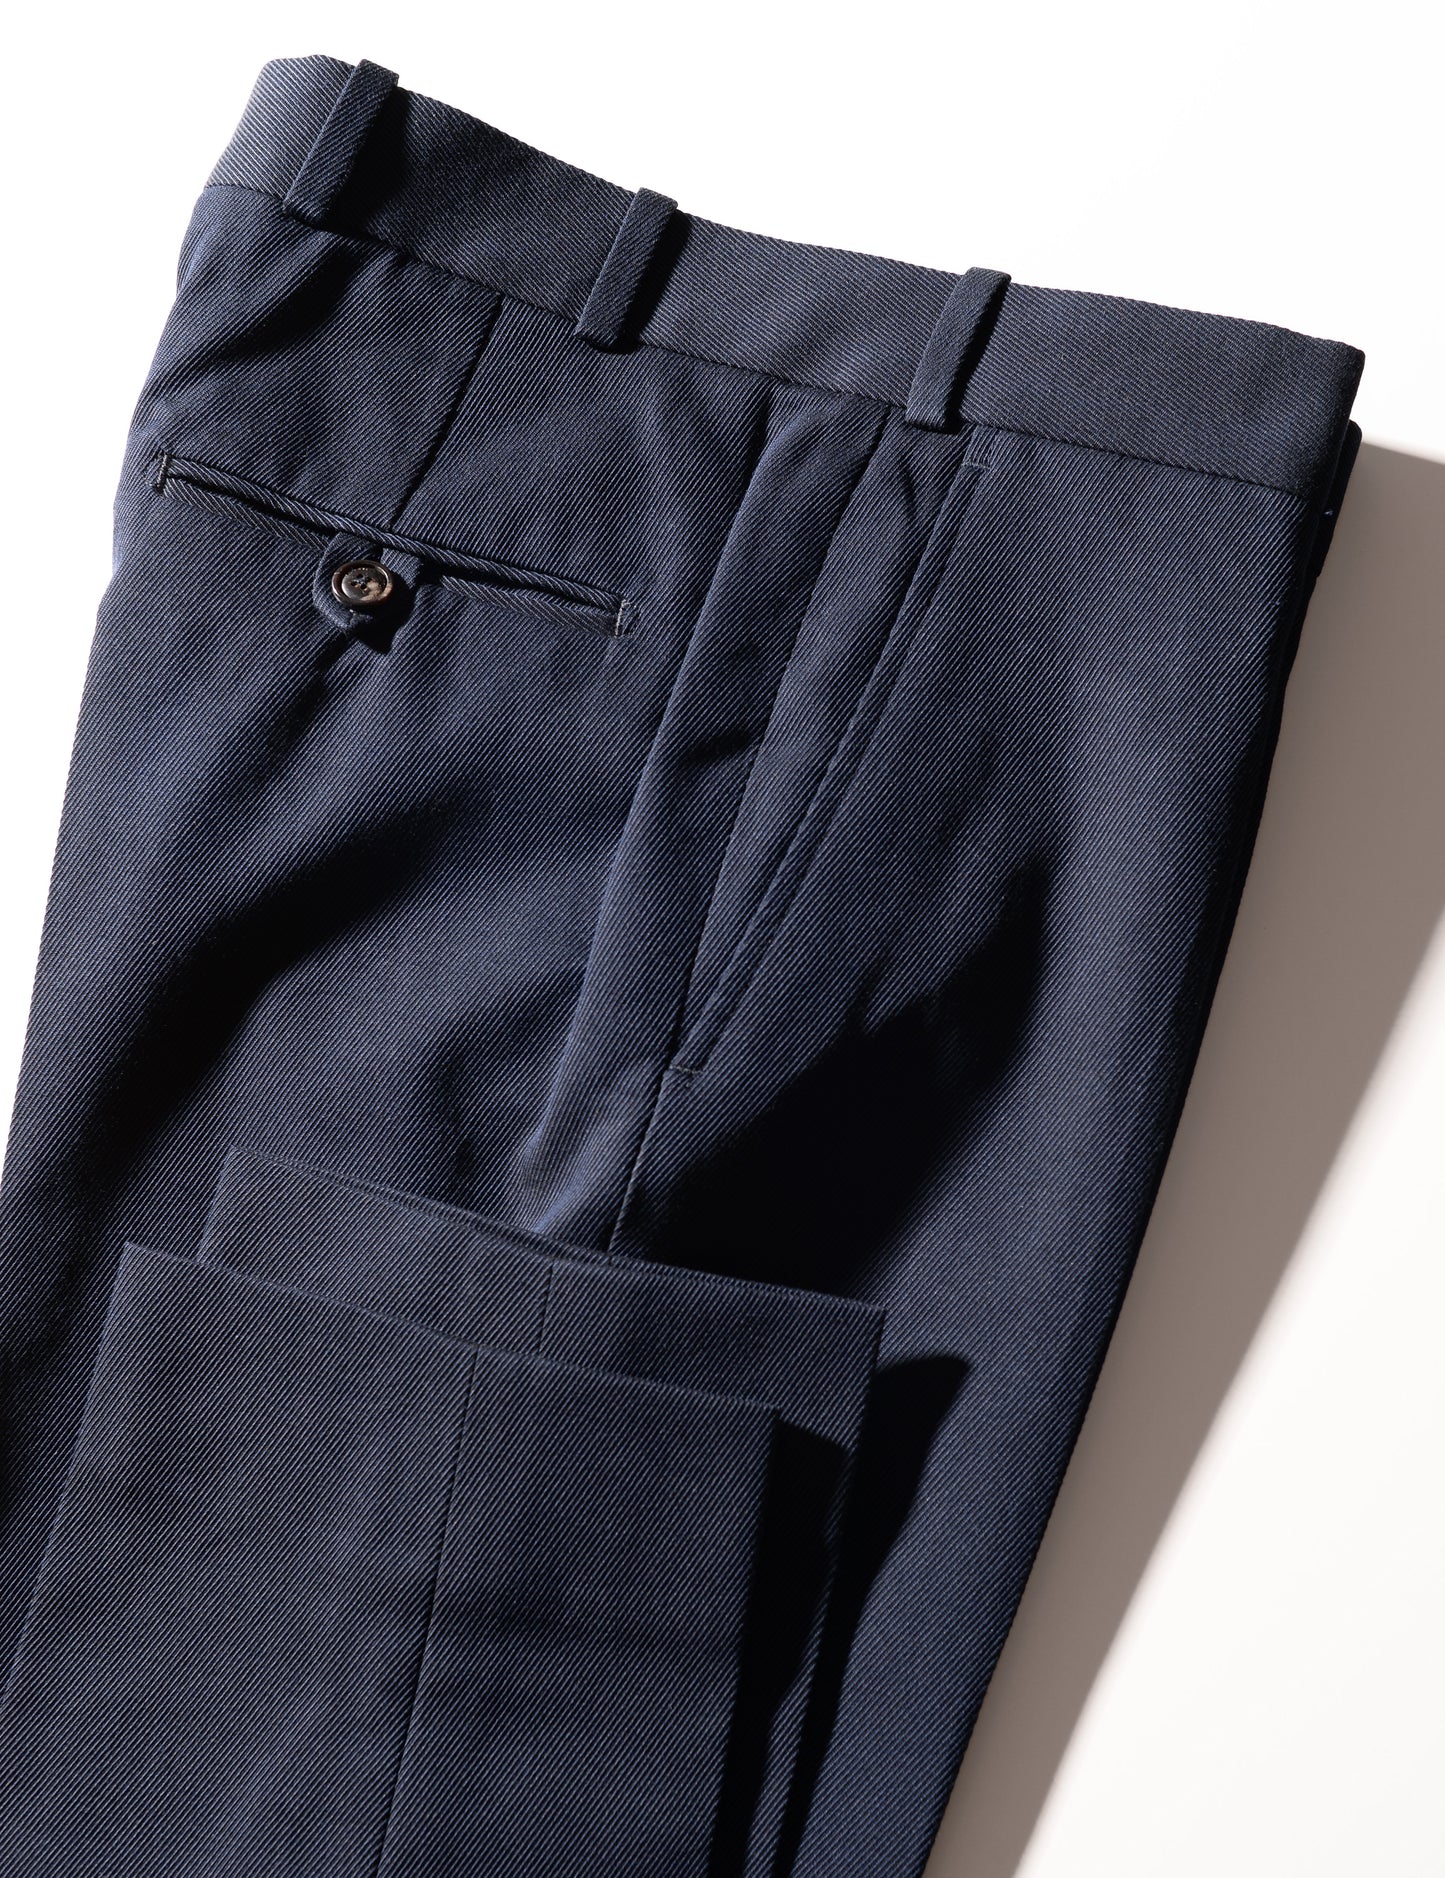 BKT50 Tailored Trousers in Cavalry Twill - Navy